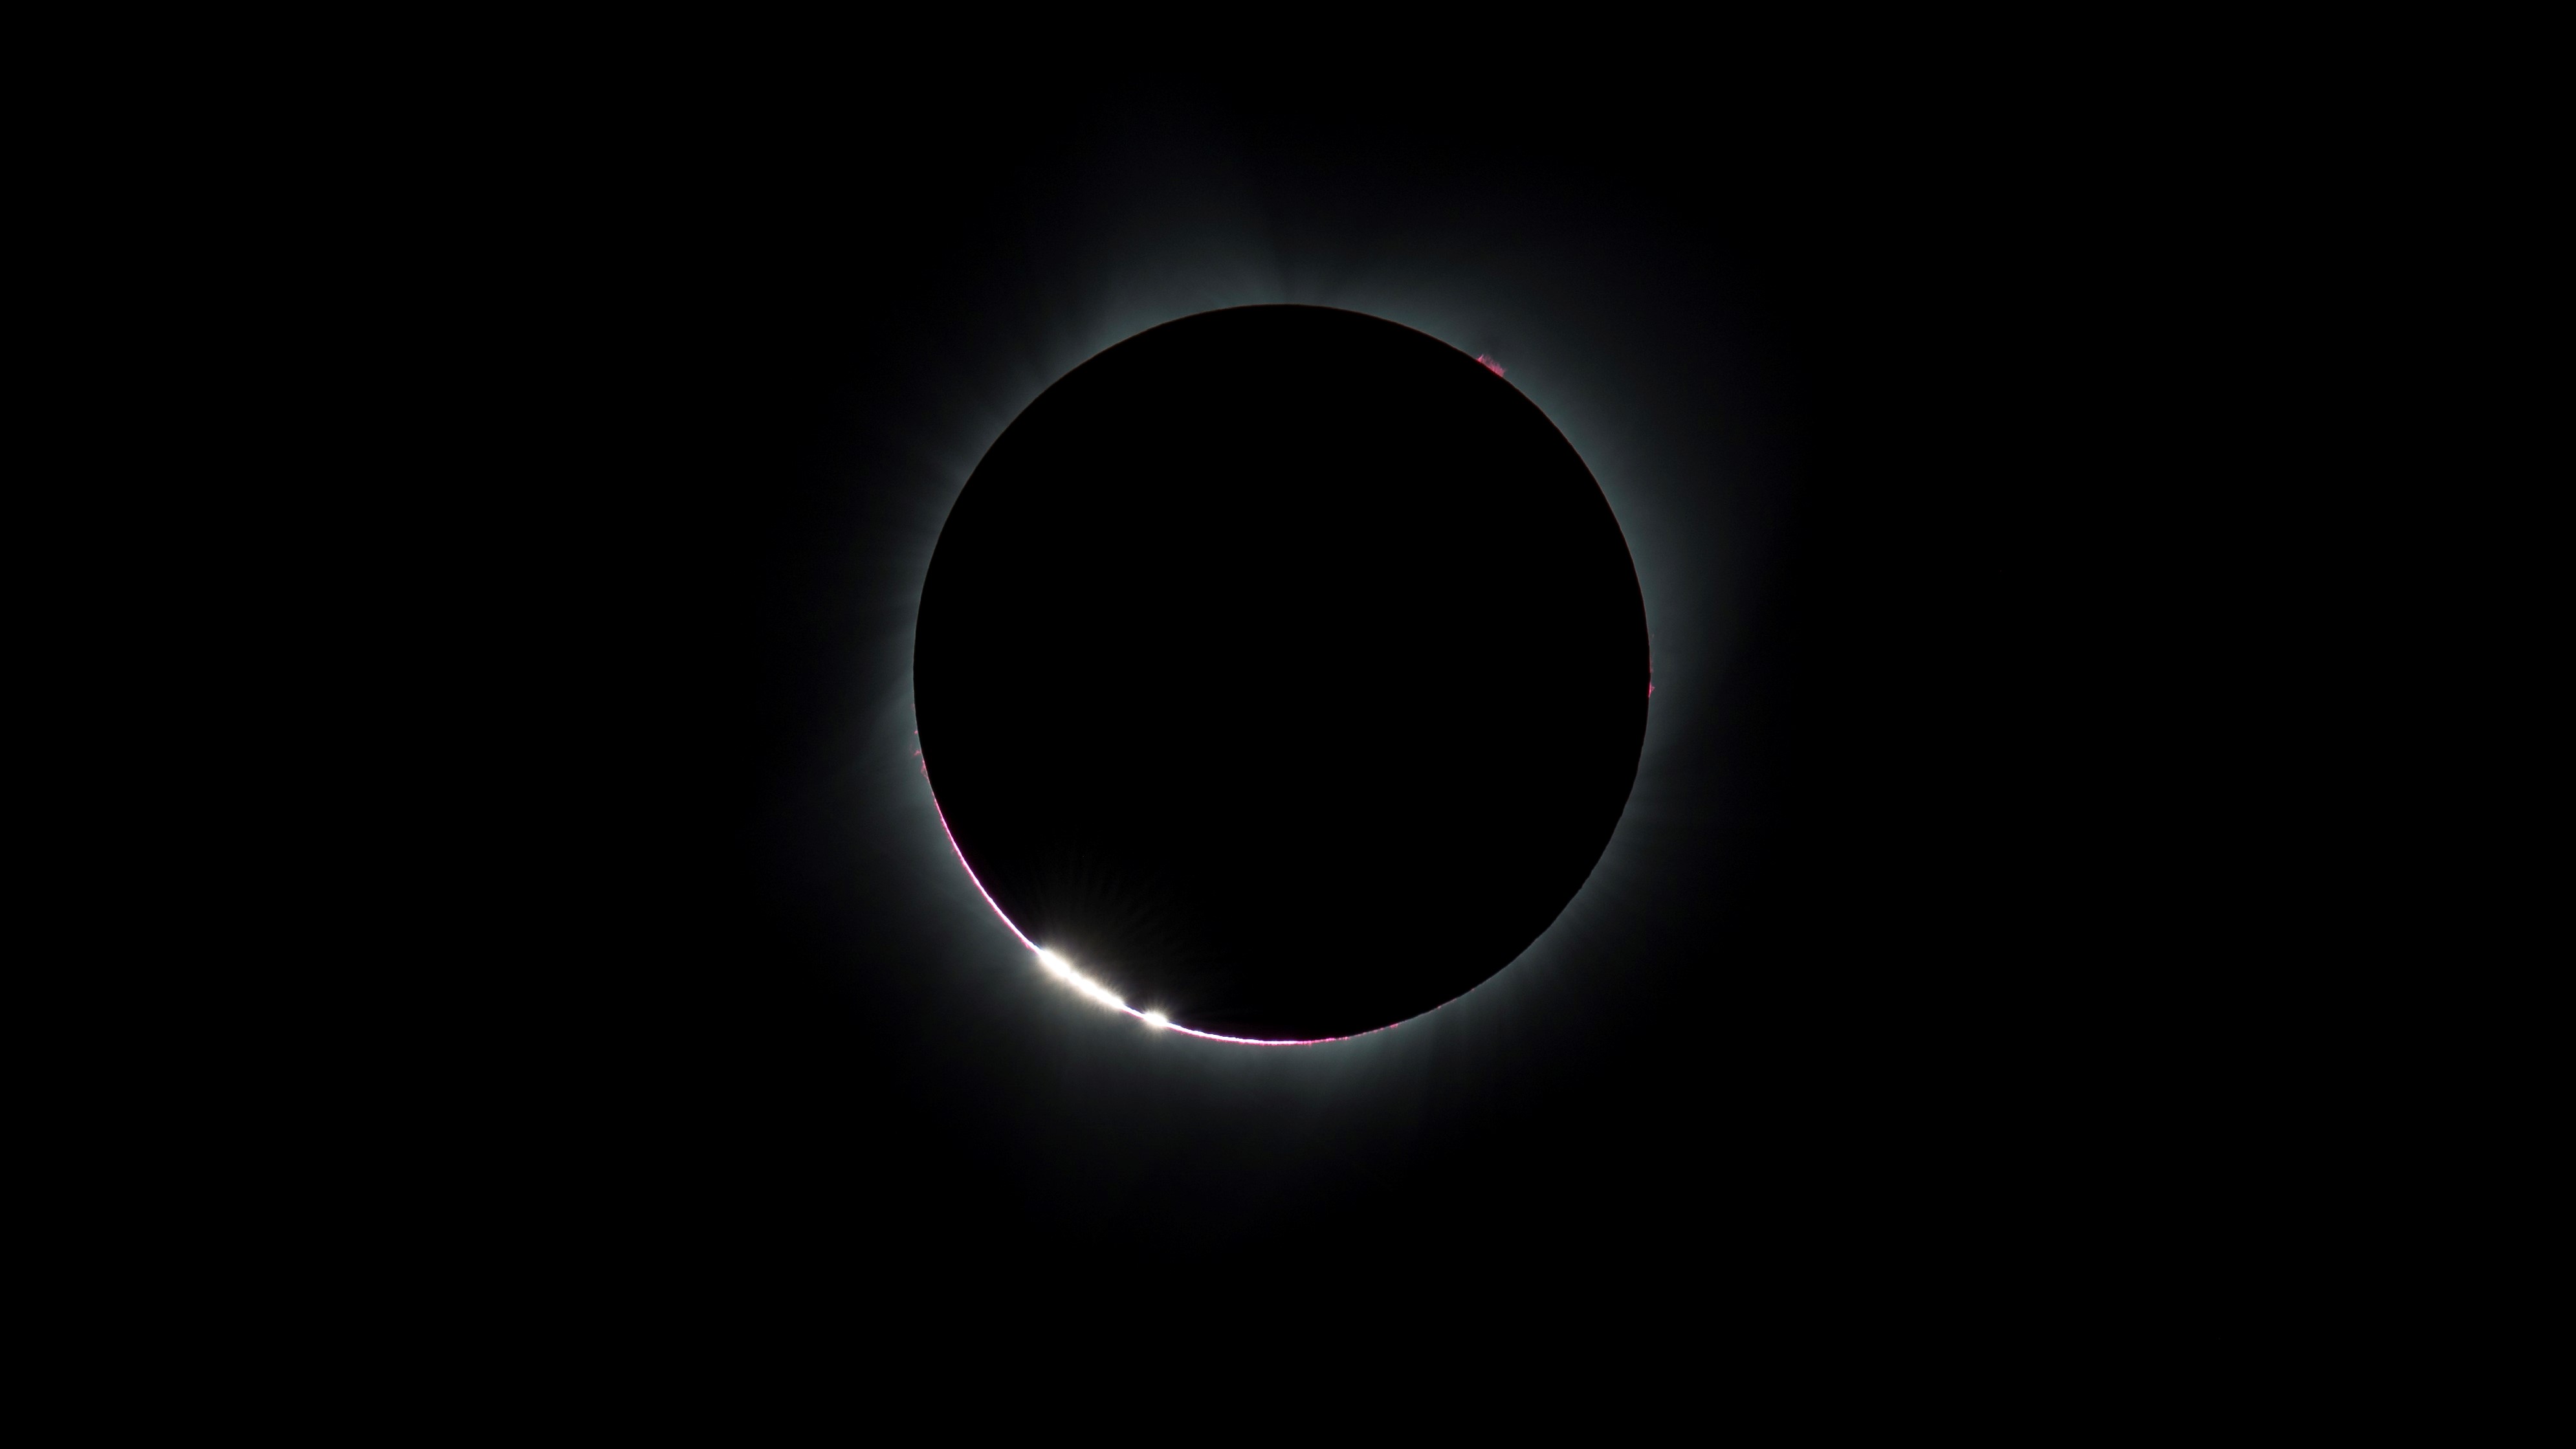 Bright beads of light are produced around the very edge of a solar eclipse just before total eclipse.